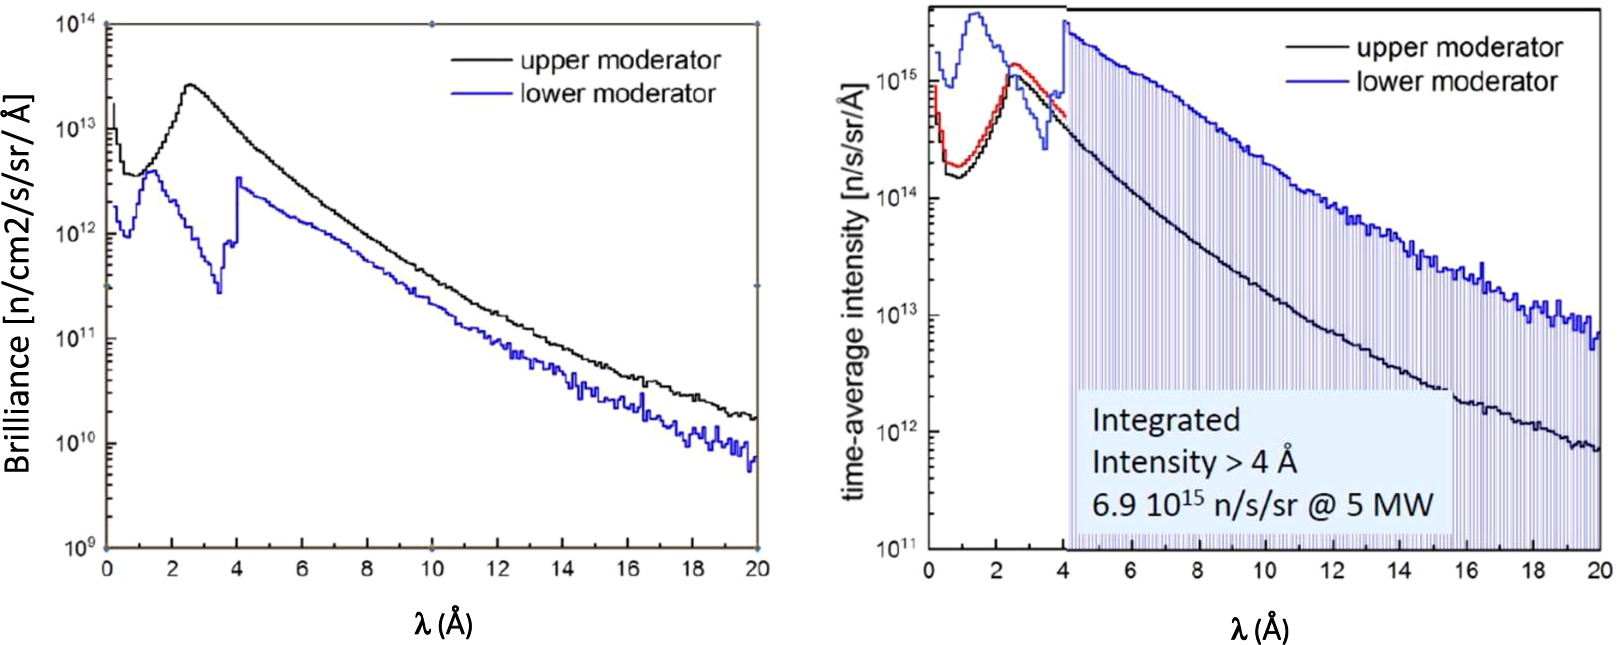 Preliminary calculations of the possible brilliance and intensity of a large liquid-deuterium moderator at the lower moderator position at ESS [12].